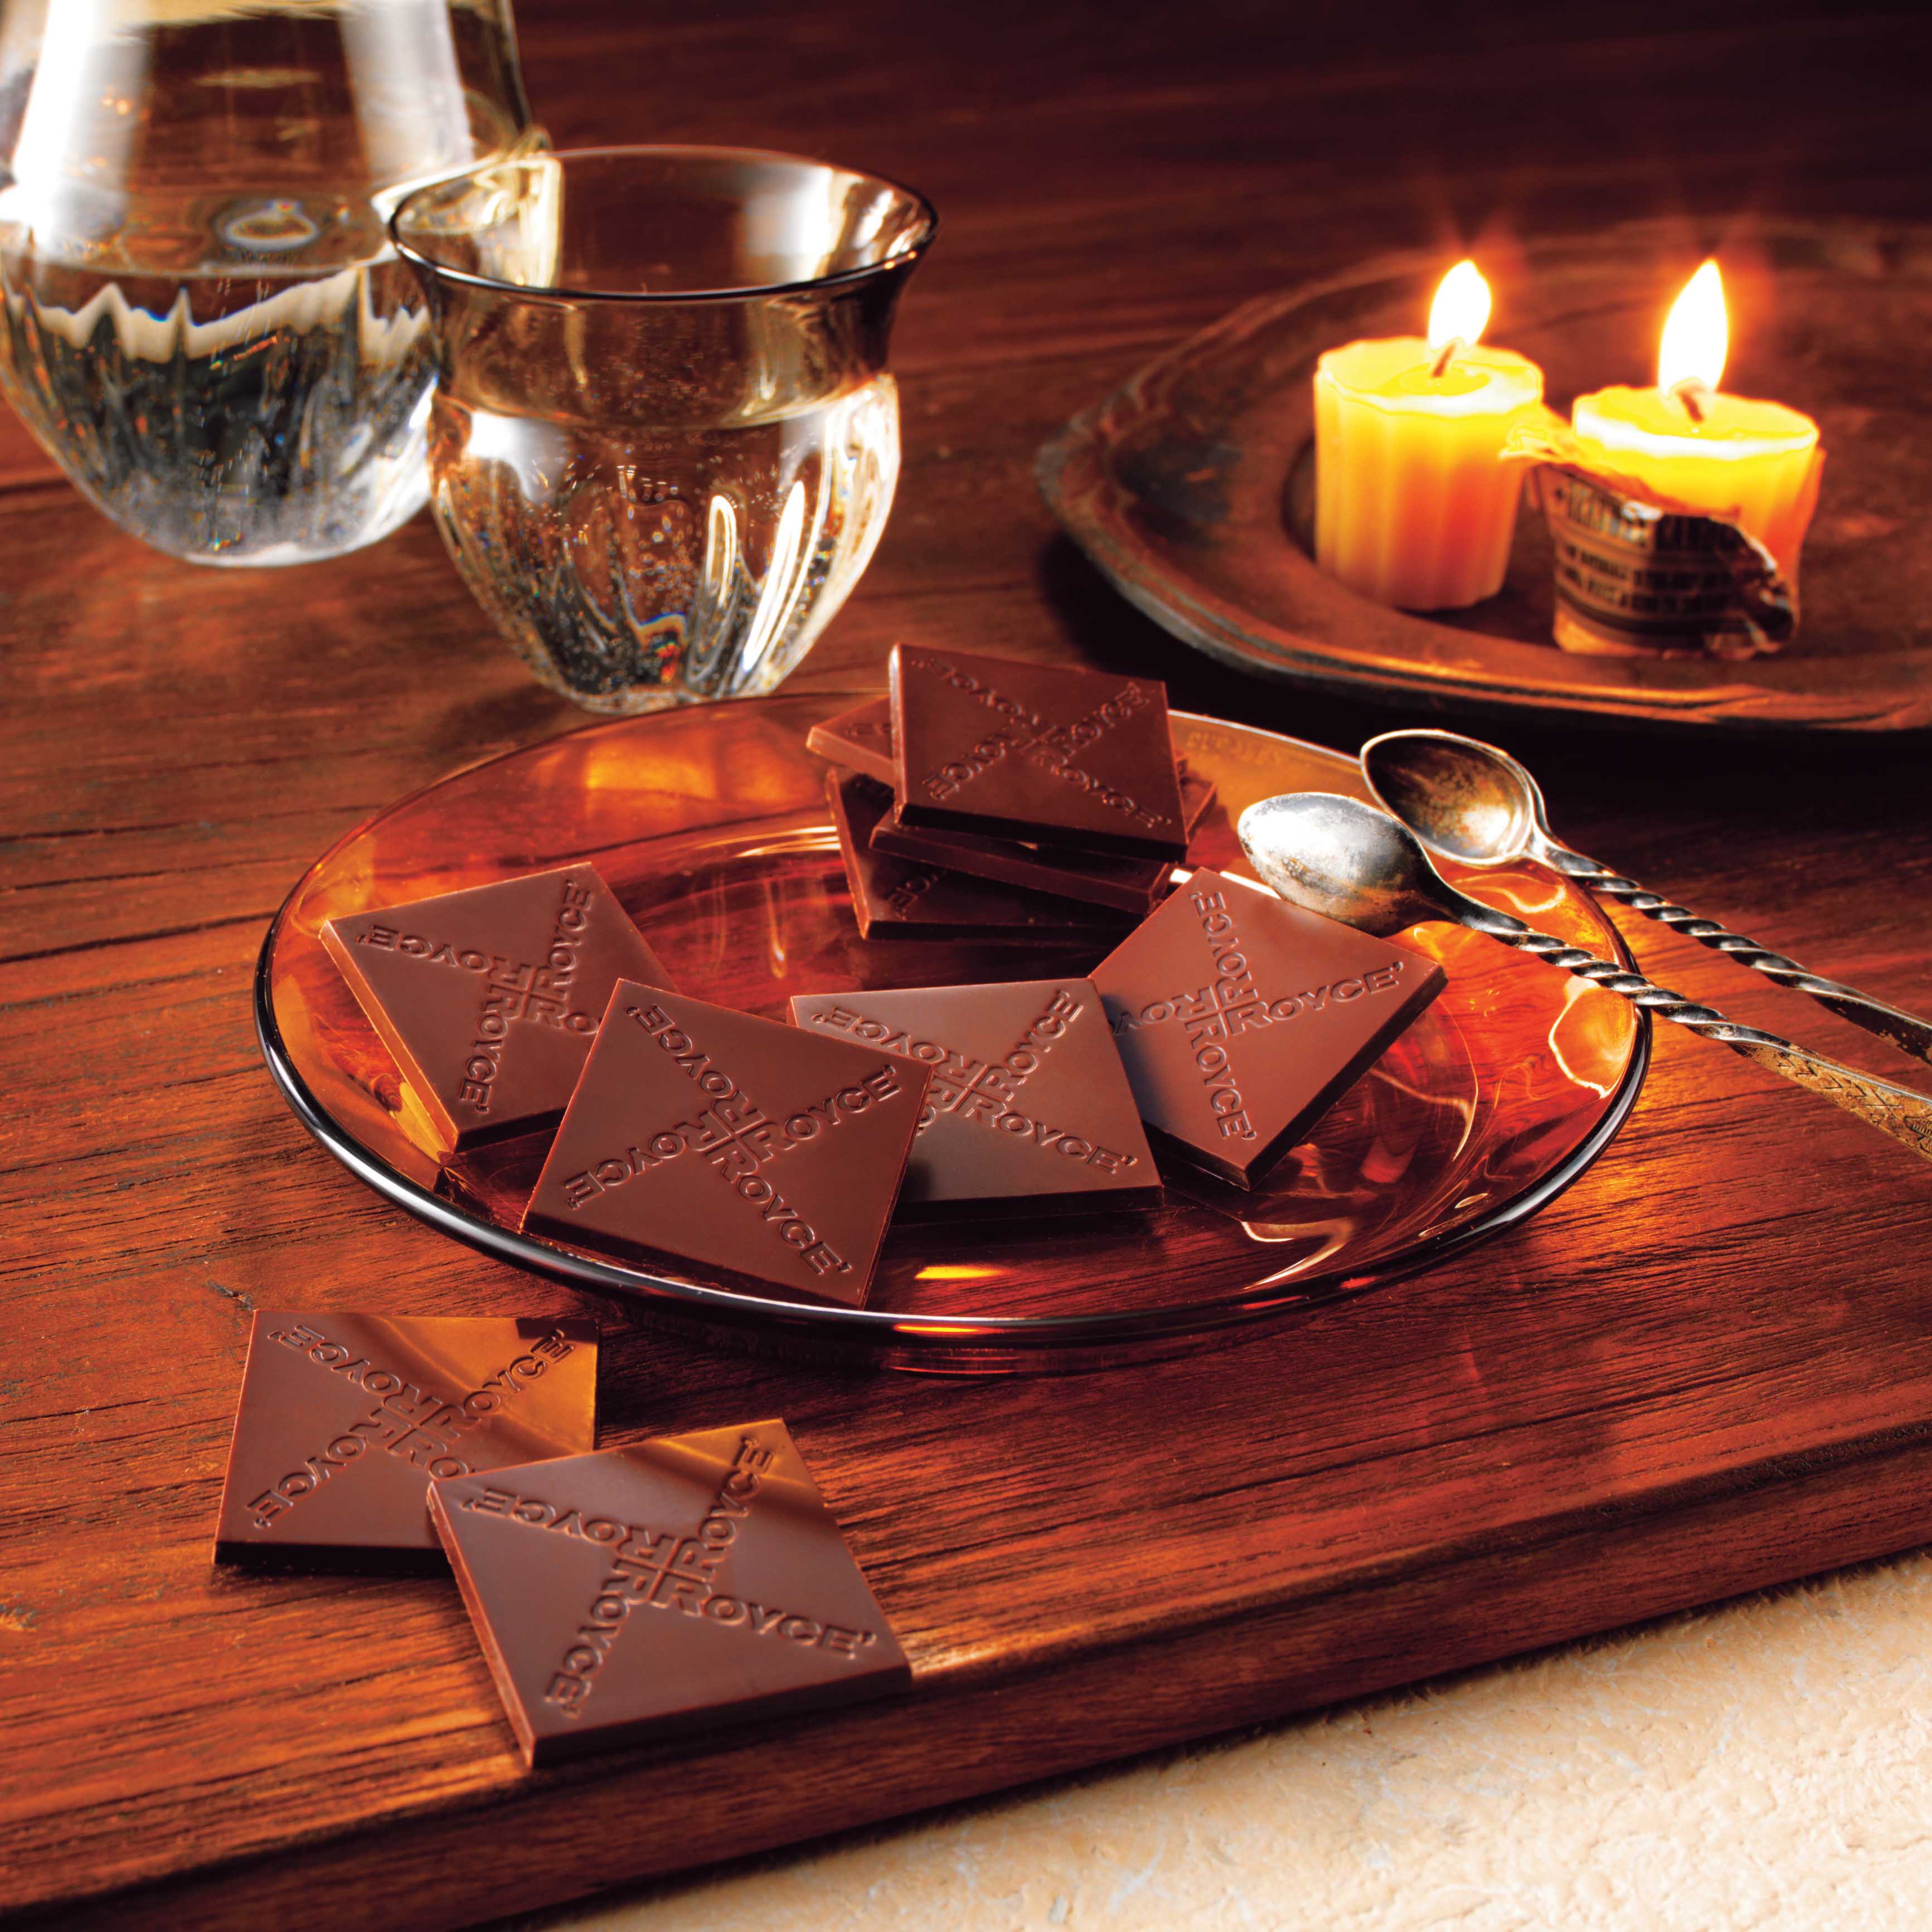 Image shows dark chocolate squares on a plate and wooden board.